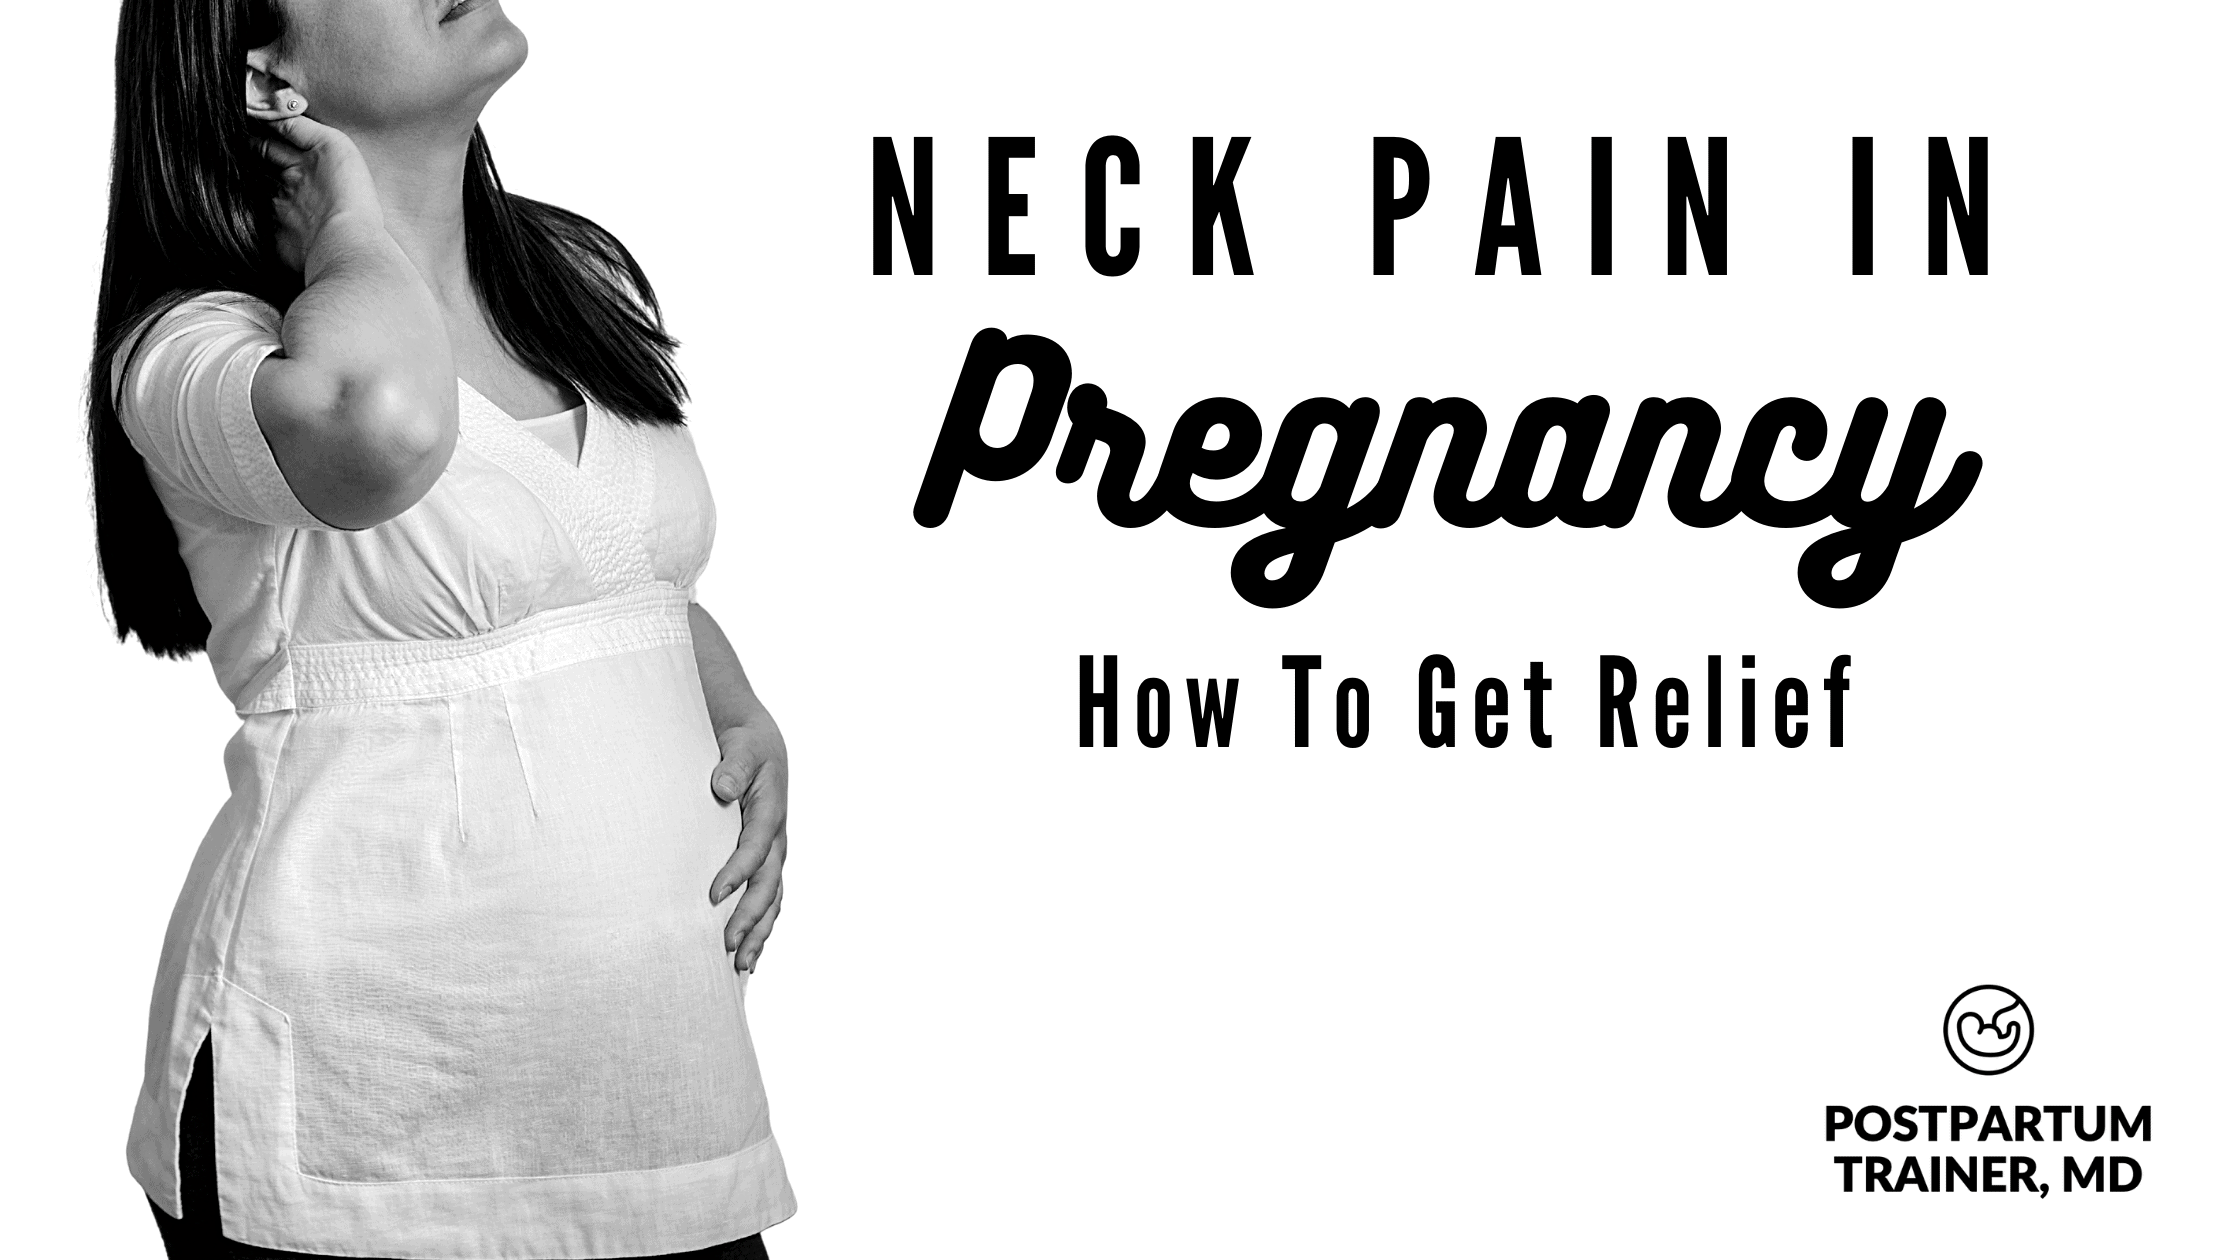 Neck Pain In Pregnancy 5 Things You Can Do For Relief Postpartum Trainer Md